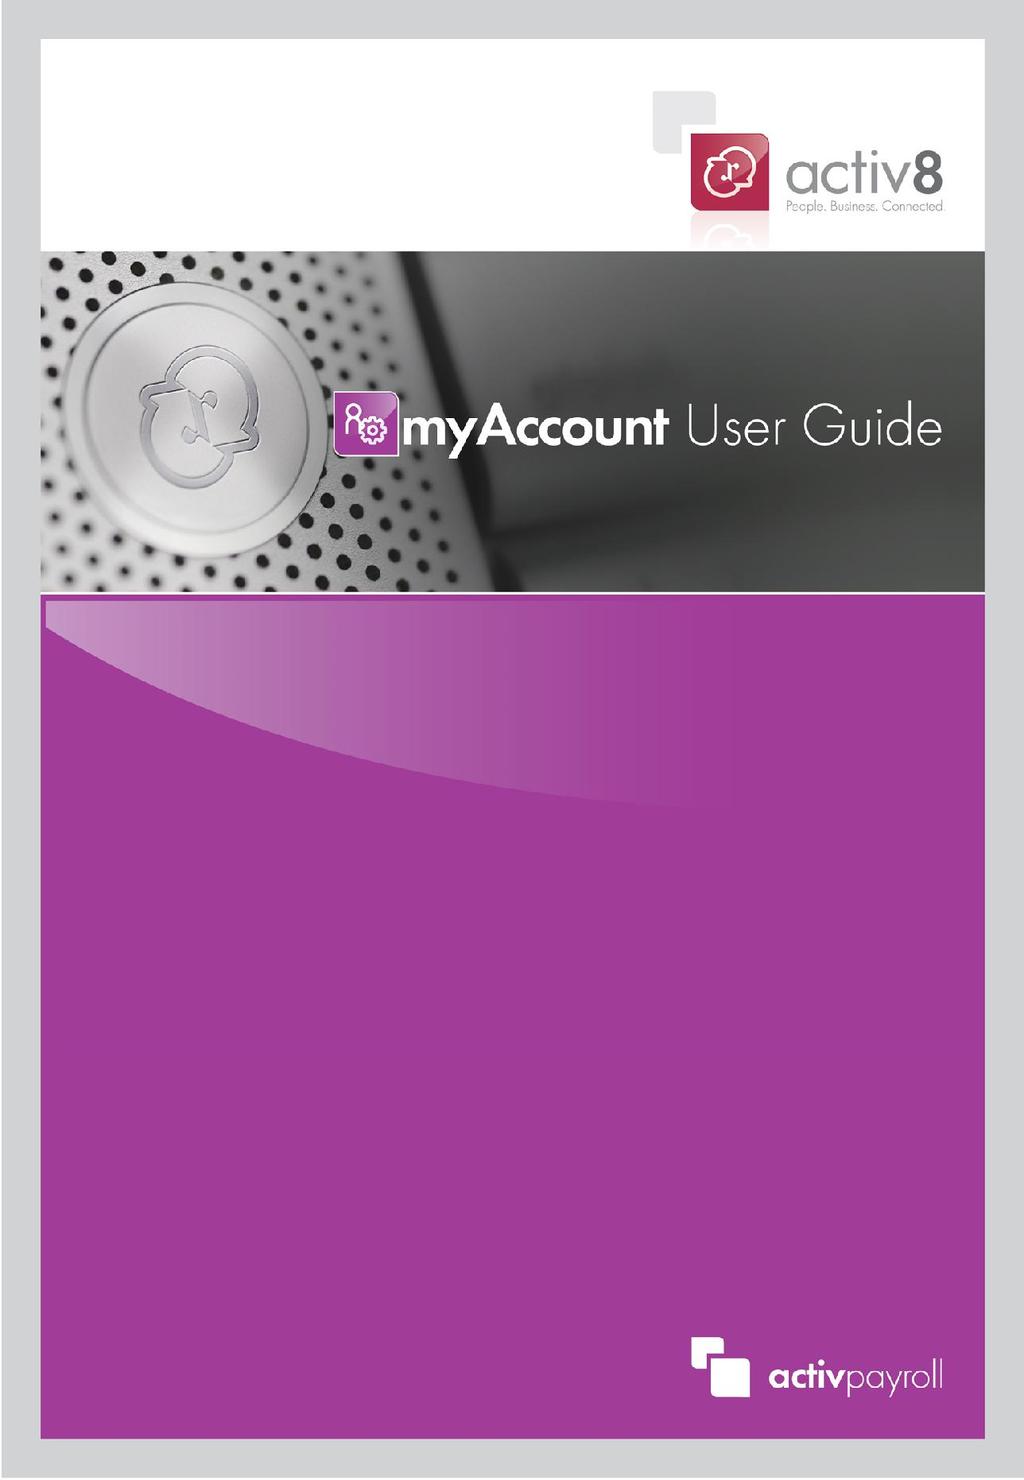 User Guide Prepared by activpayroll s activ8 Team -